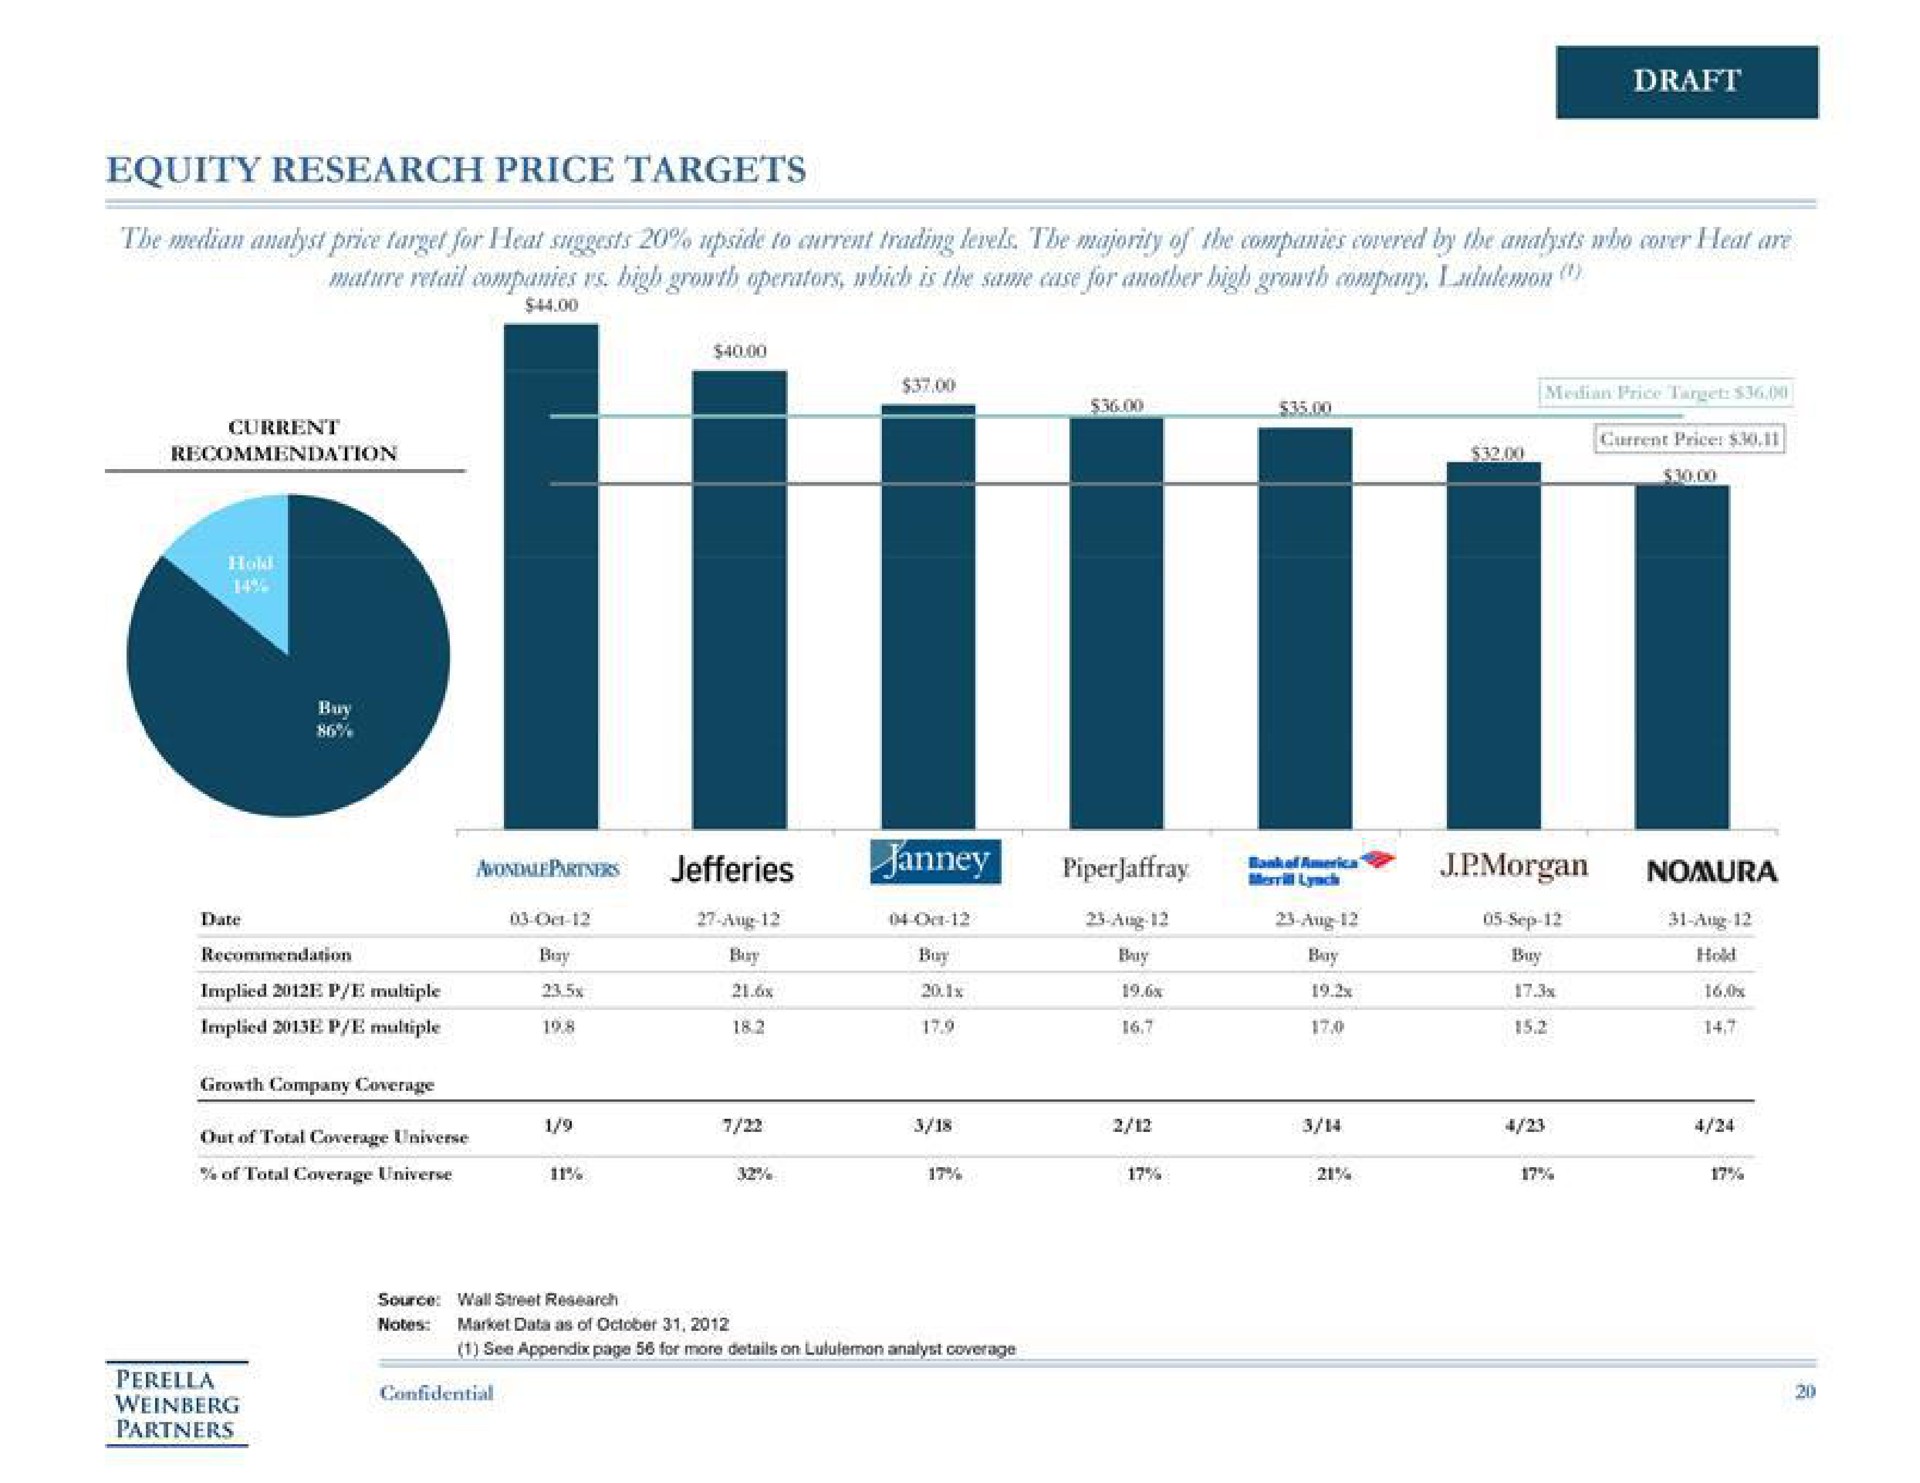 equity research price targets draft | Perella Weinberg Partners